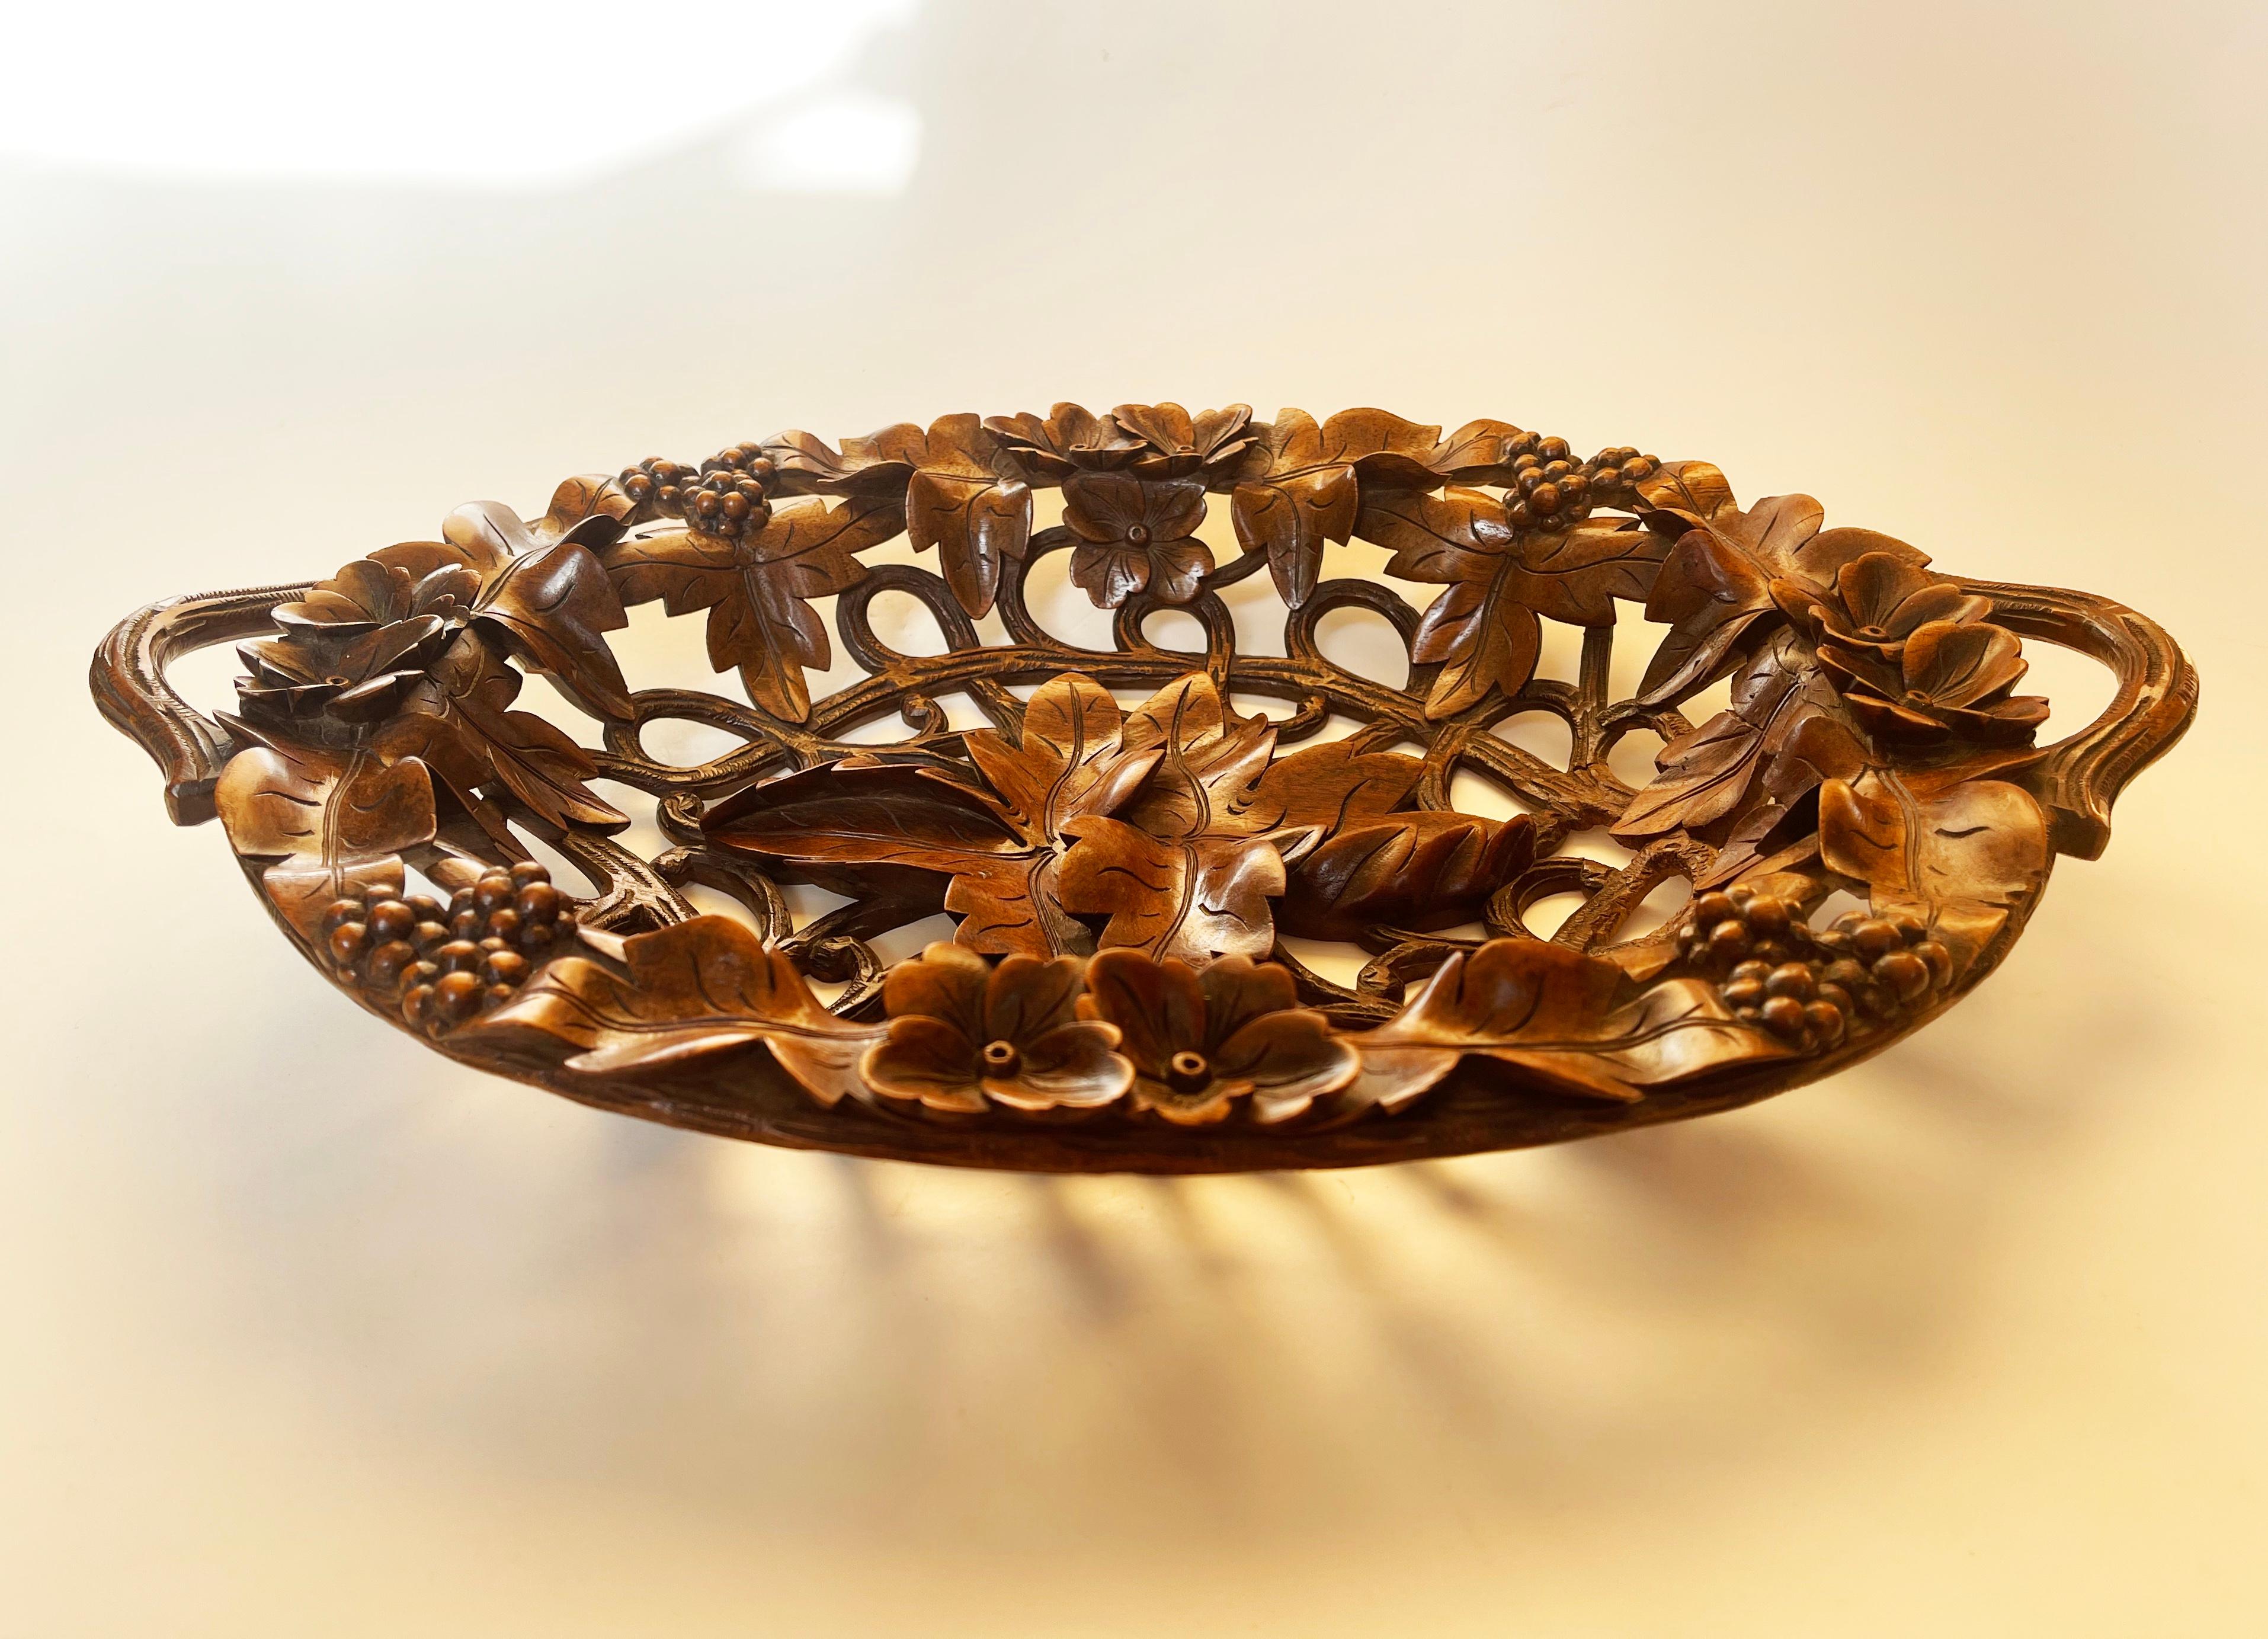 Large and expressive – in fact absolutely unique hand carved bread basket or bowl from the Black Forest, Germany.
Made from intricately shaped & polished dark walnut wood.
Made from walnut, it features forest berries, overlapping leaves and flowers